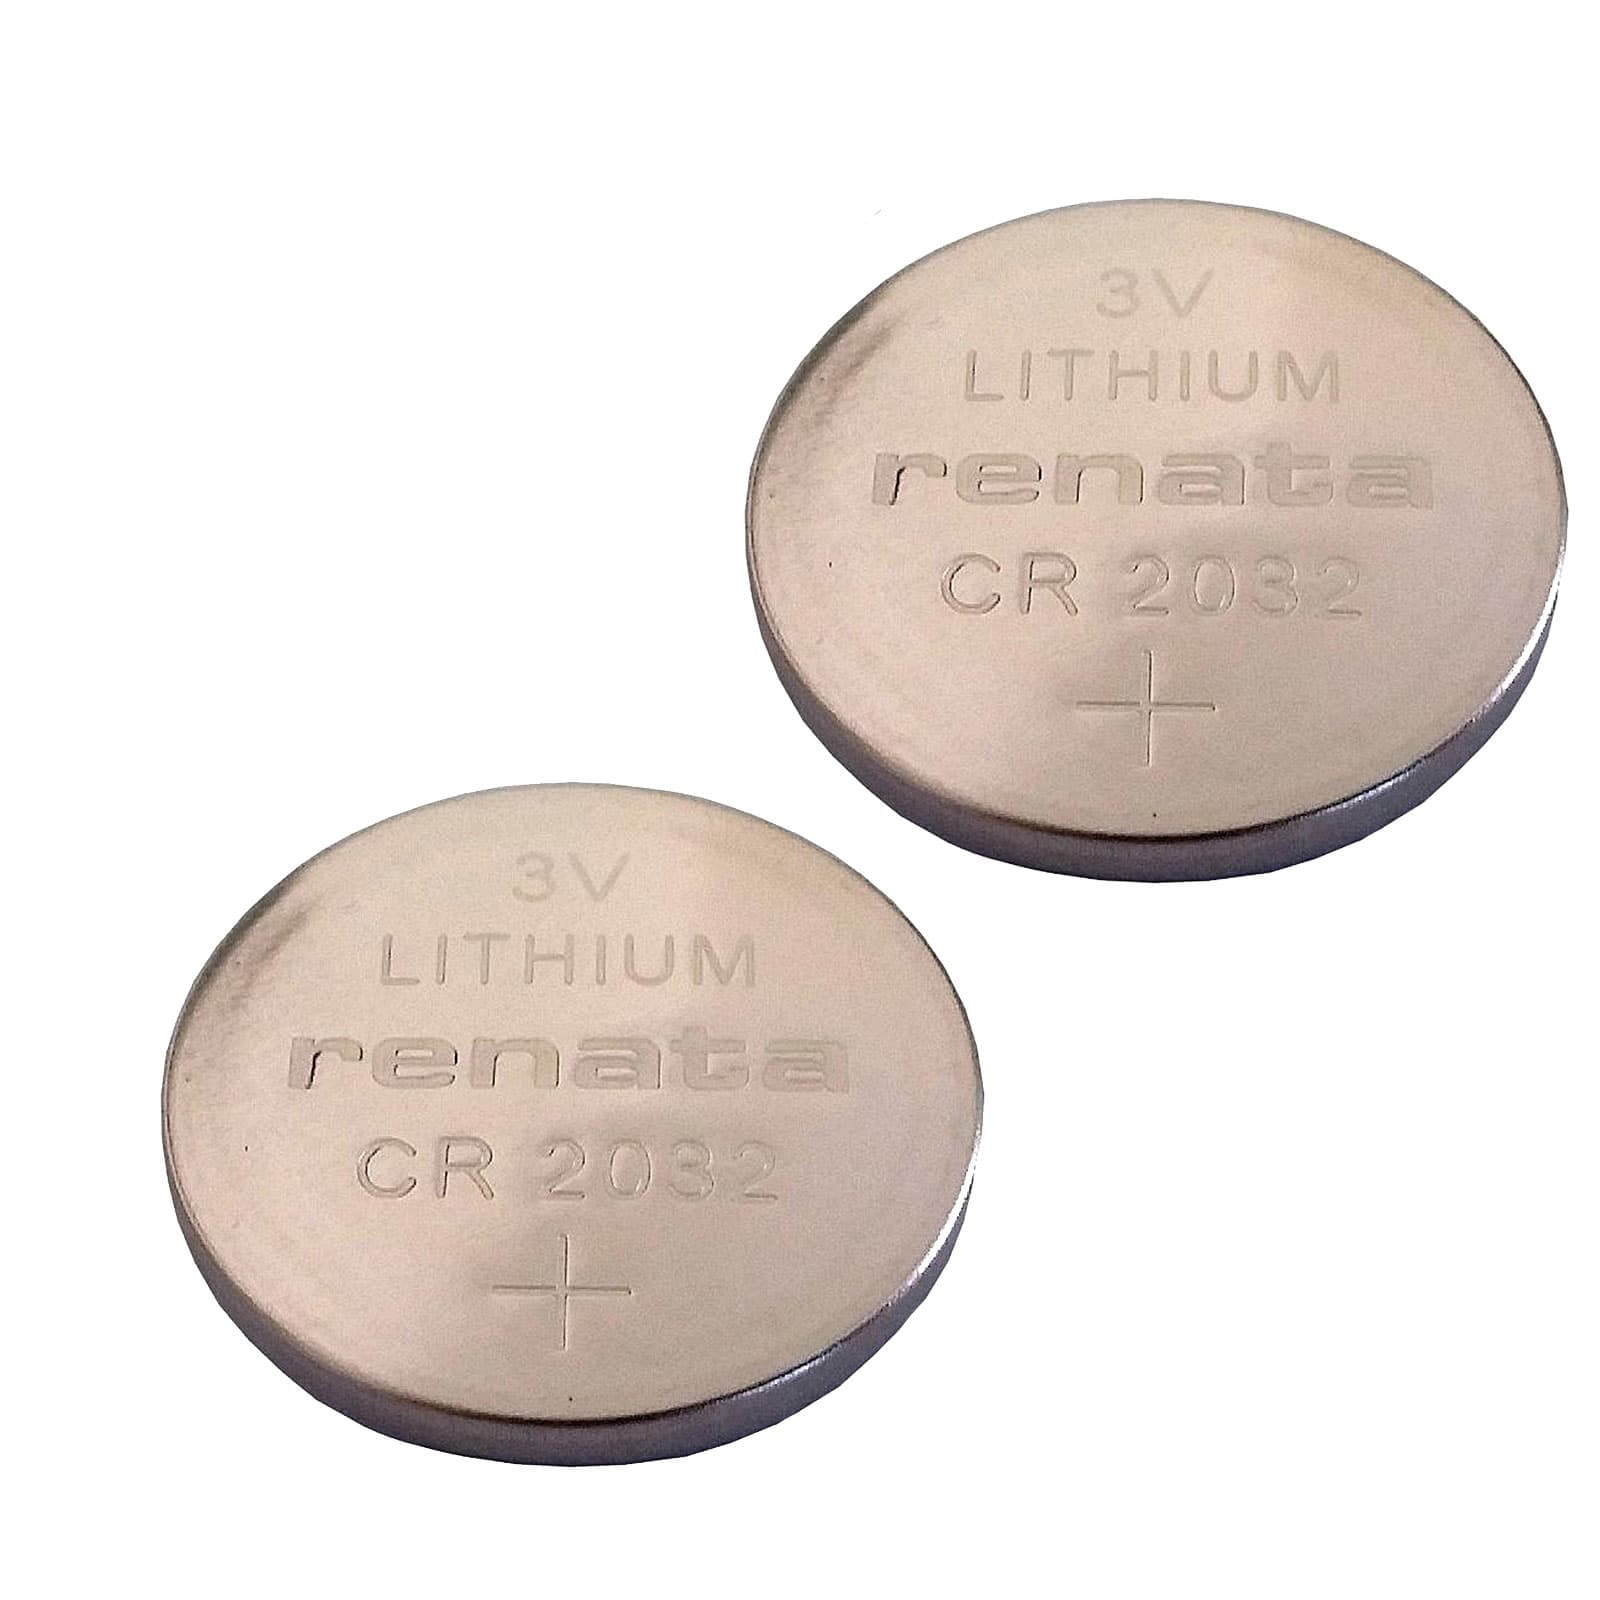 2 x NEW CR2032 3v lithium battery with TABS MEMORY BACK UP CMOS (two)